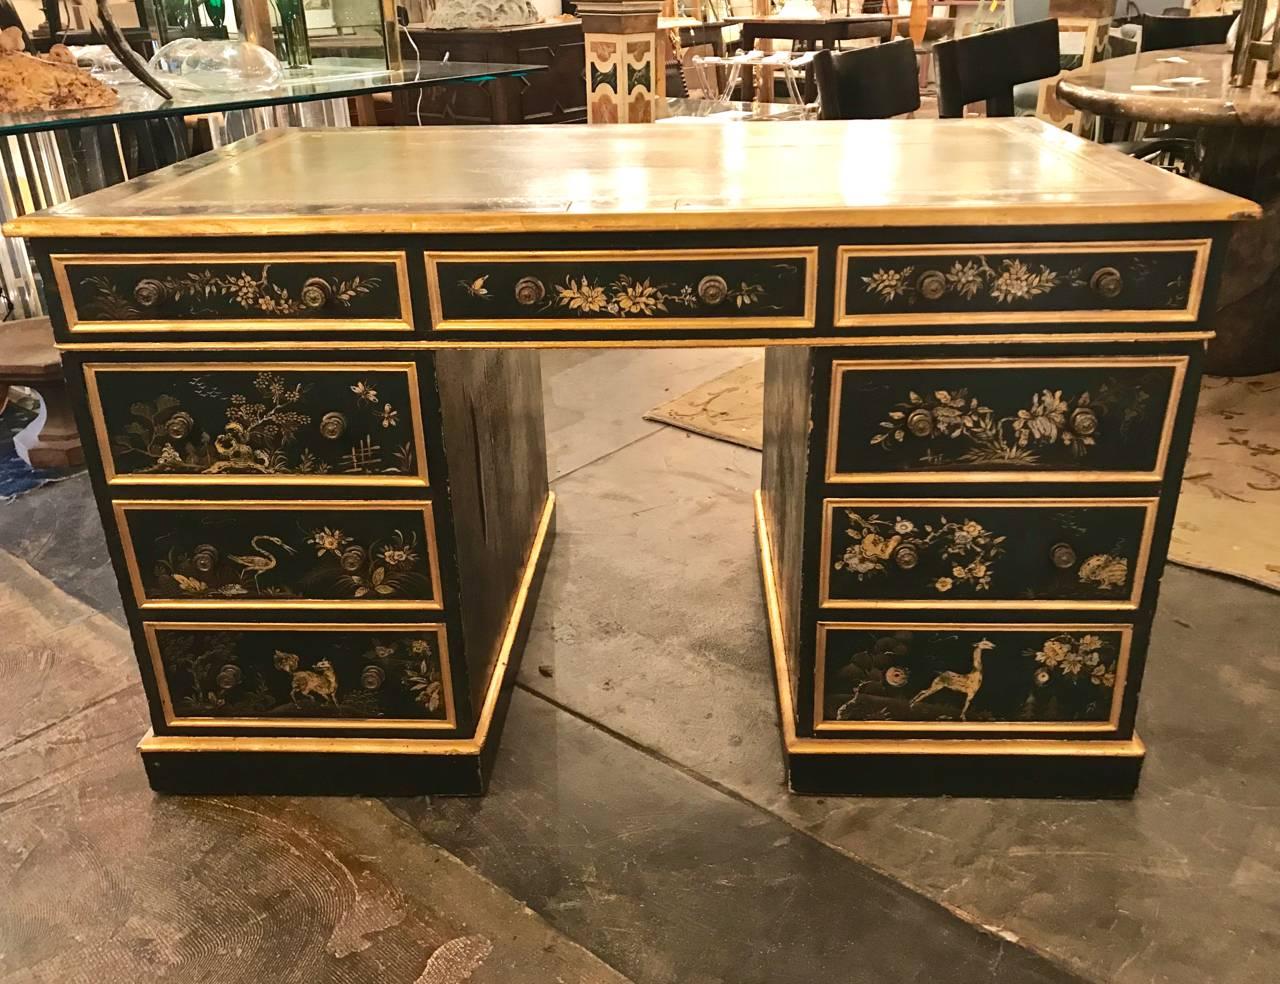 Regency Exceptional Double Pedestal Chinoiserie/Japanned Desk, 19th Century